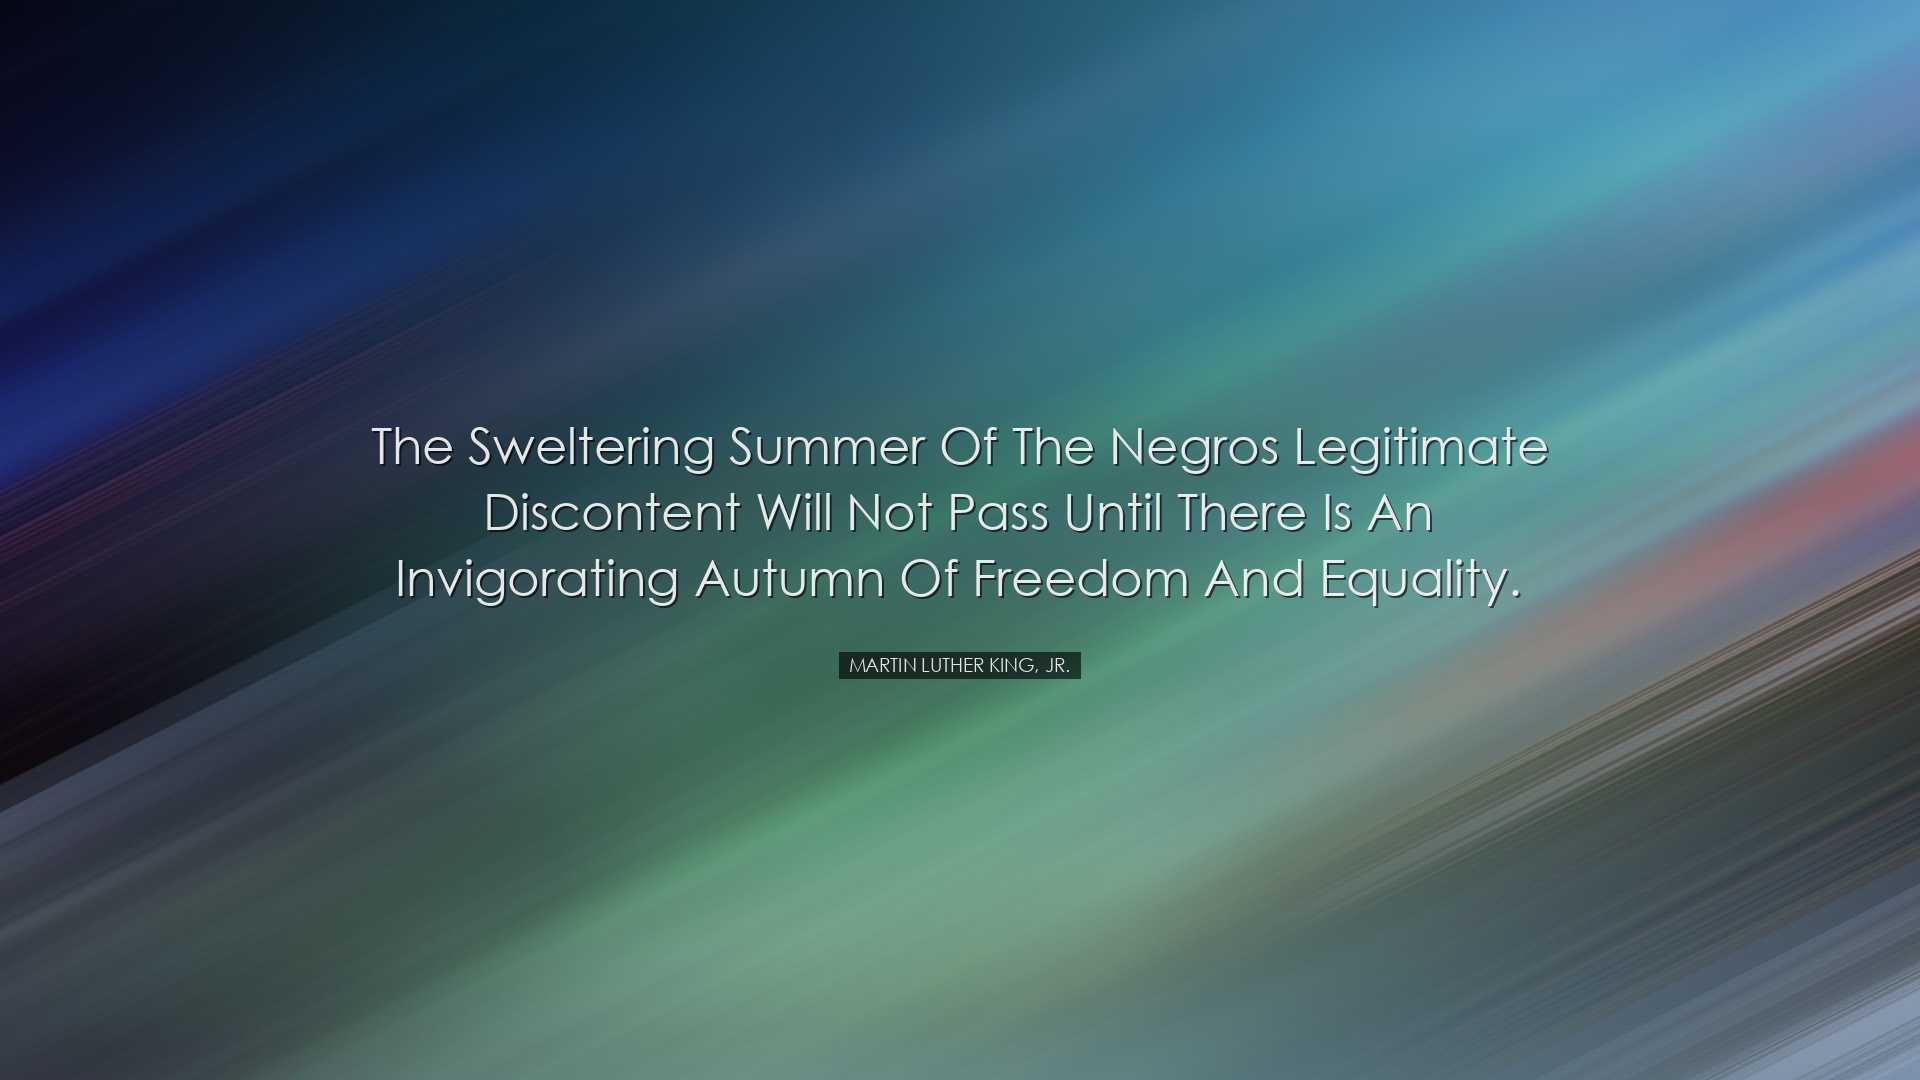 The sweltering summer of the Negros legitimate discontent will not